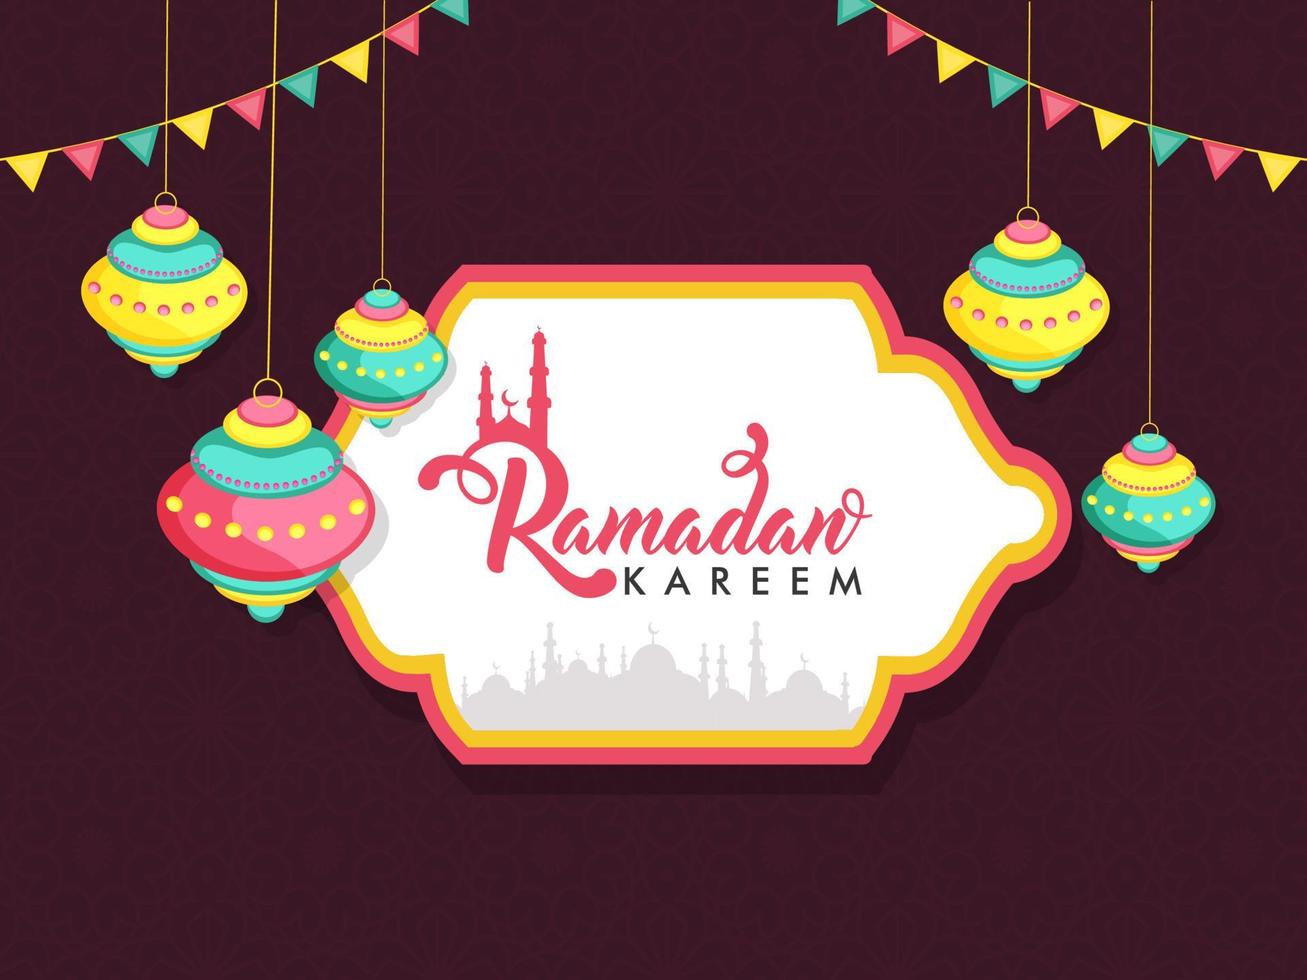 Ramadan Kareem Font with Silhouette Mosque in Vintage Frame, Hanging Lanterns and Bunting Flags Decorated on Burgundy Islamic Pattern Background. vector